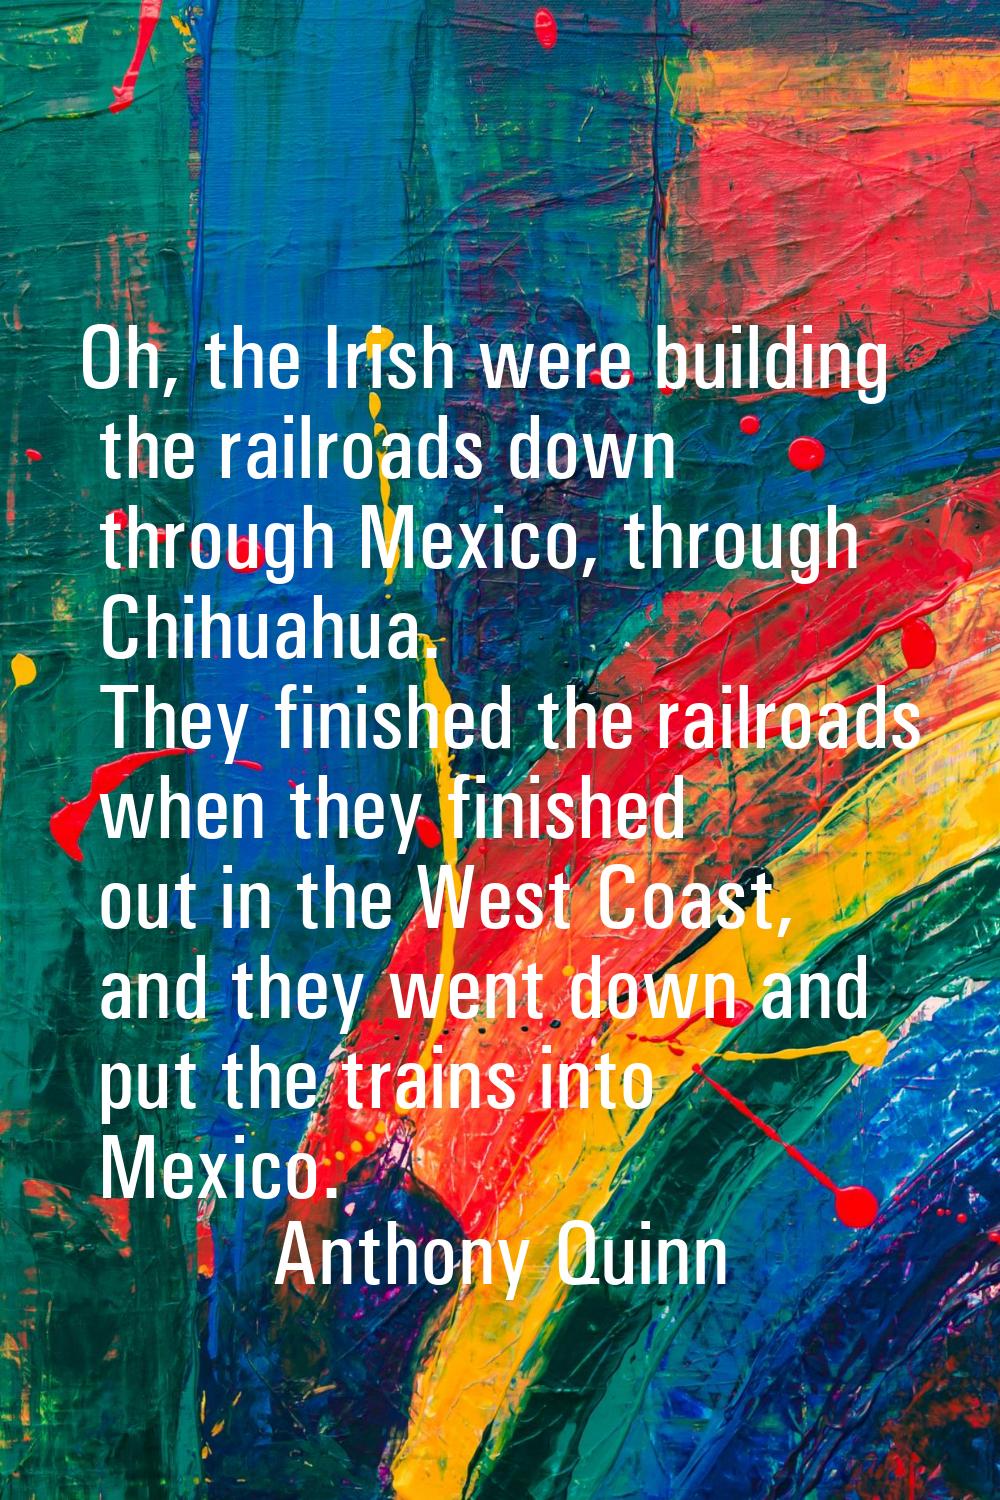 Oh, the Irish were building the railroads down through Mexico, through Chihuahua. They finished the